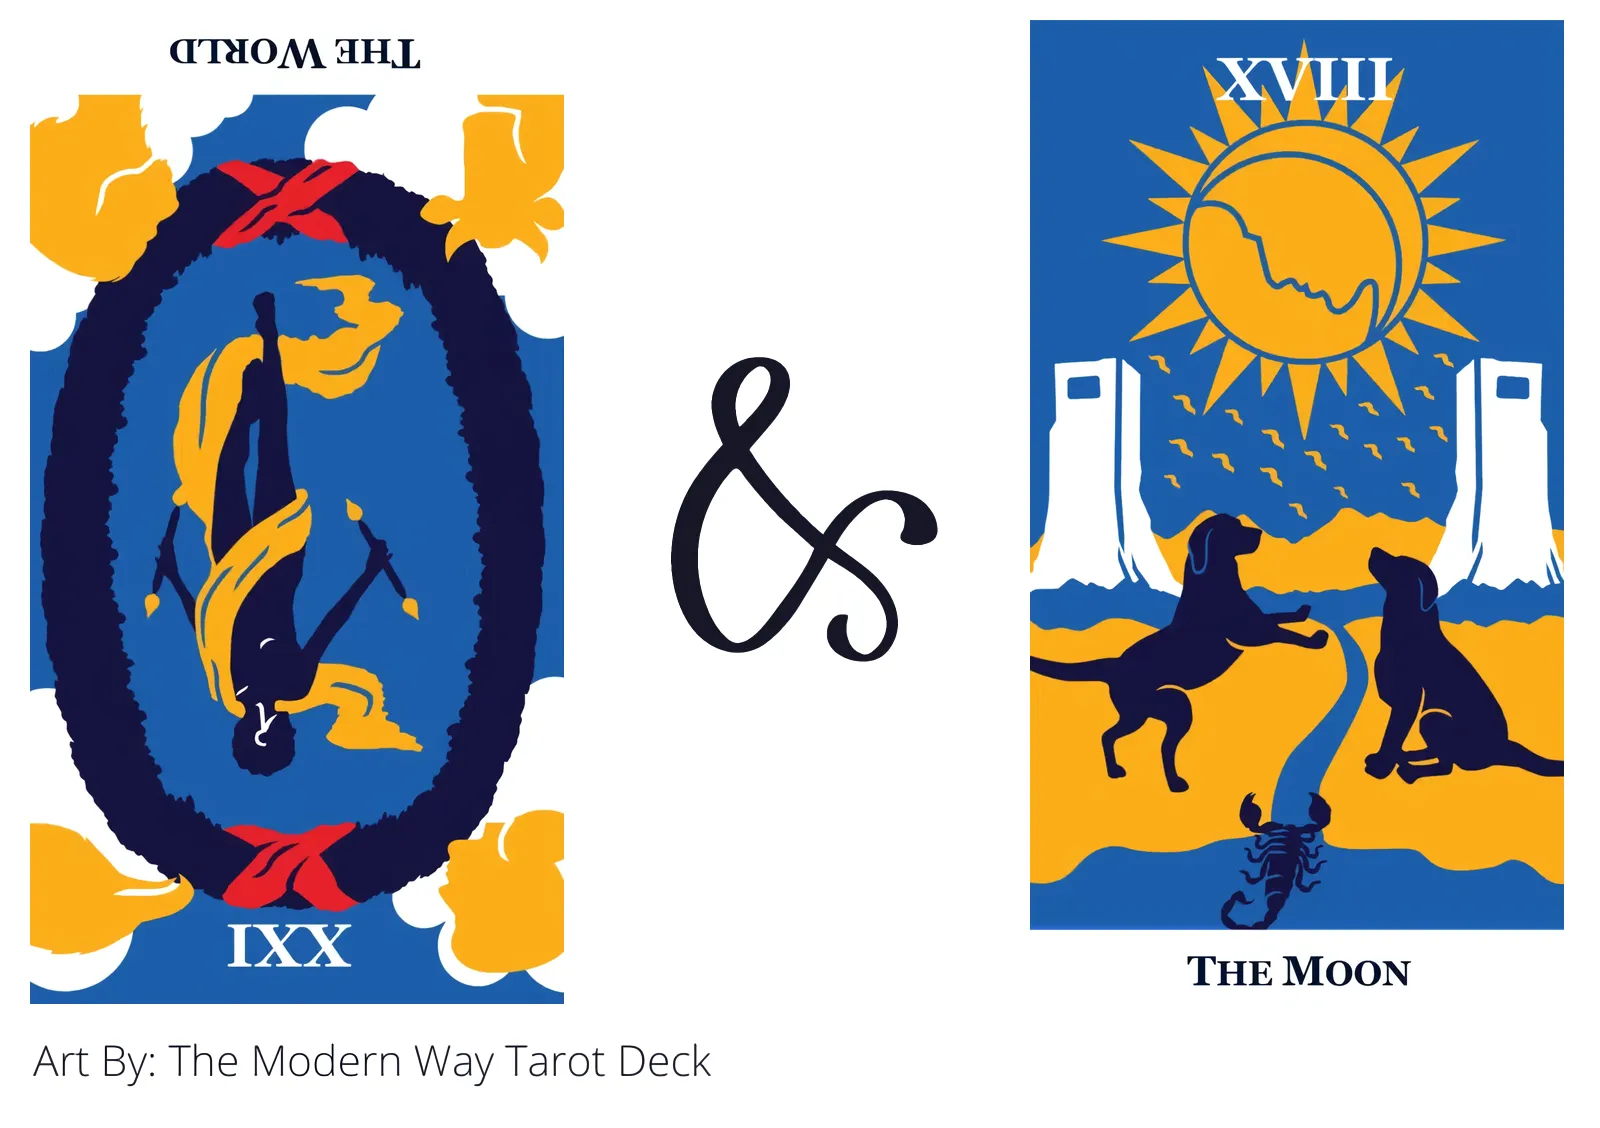 the world reversed and the moon tarot cards together